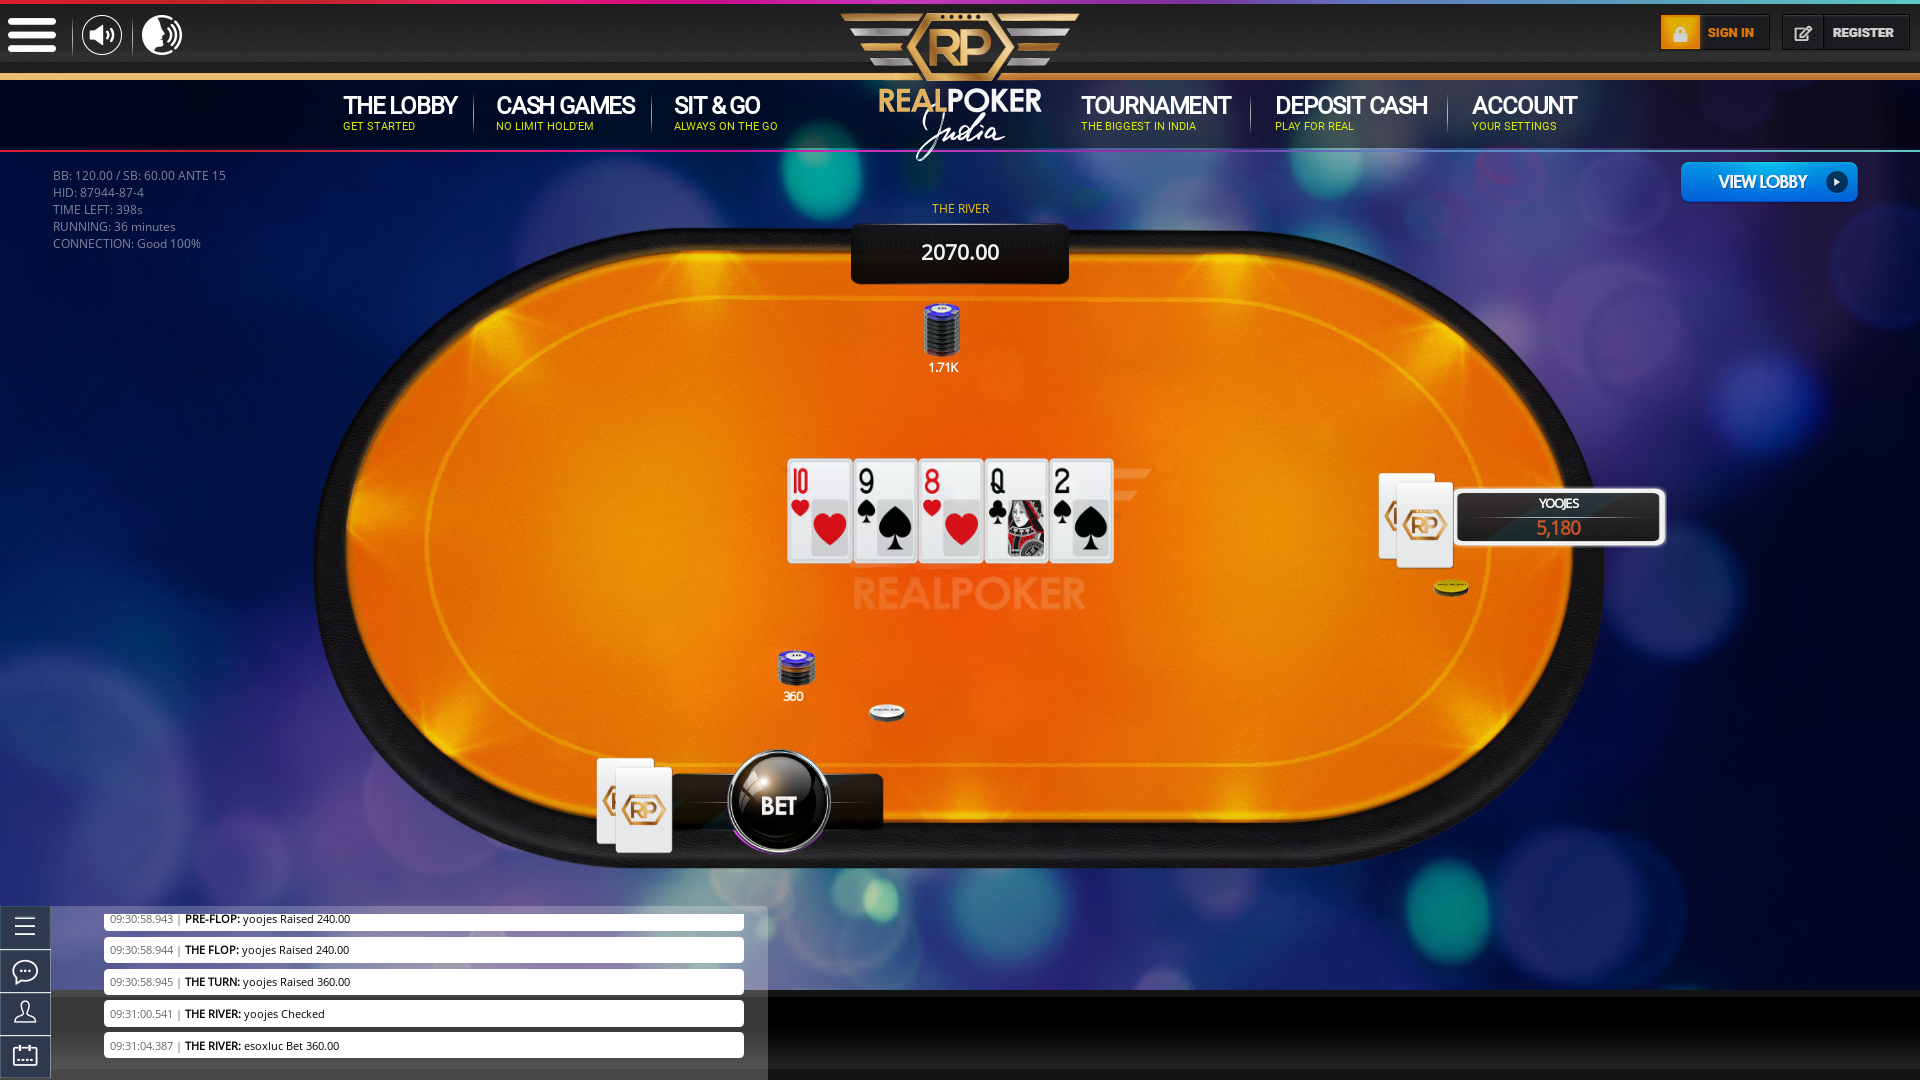 6 player texas holdem table at real poker with the table id 87944